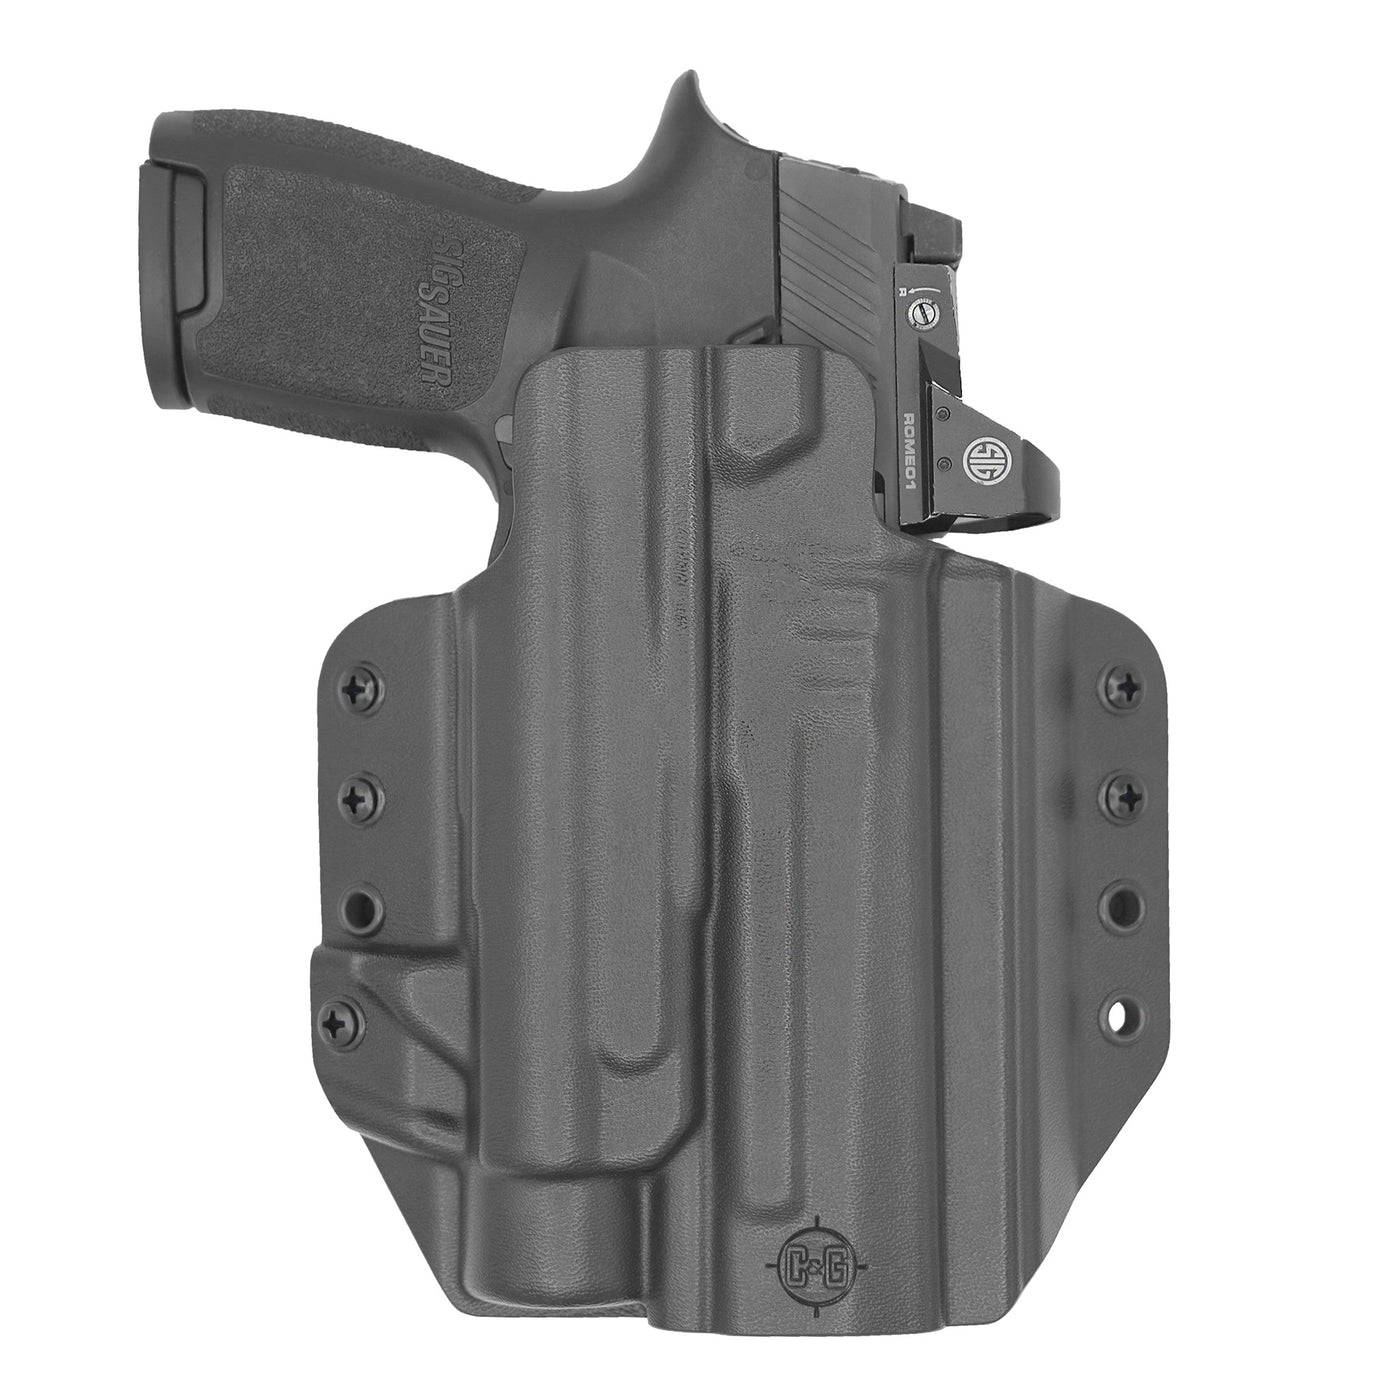 C&G Holsters quickship OWB Tactical Springfield XD-M Elite Streamlight TLR1 in holstered position